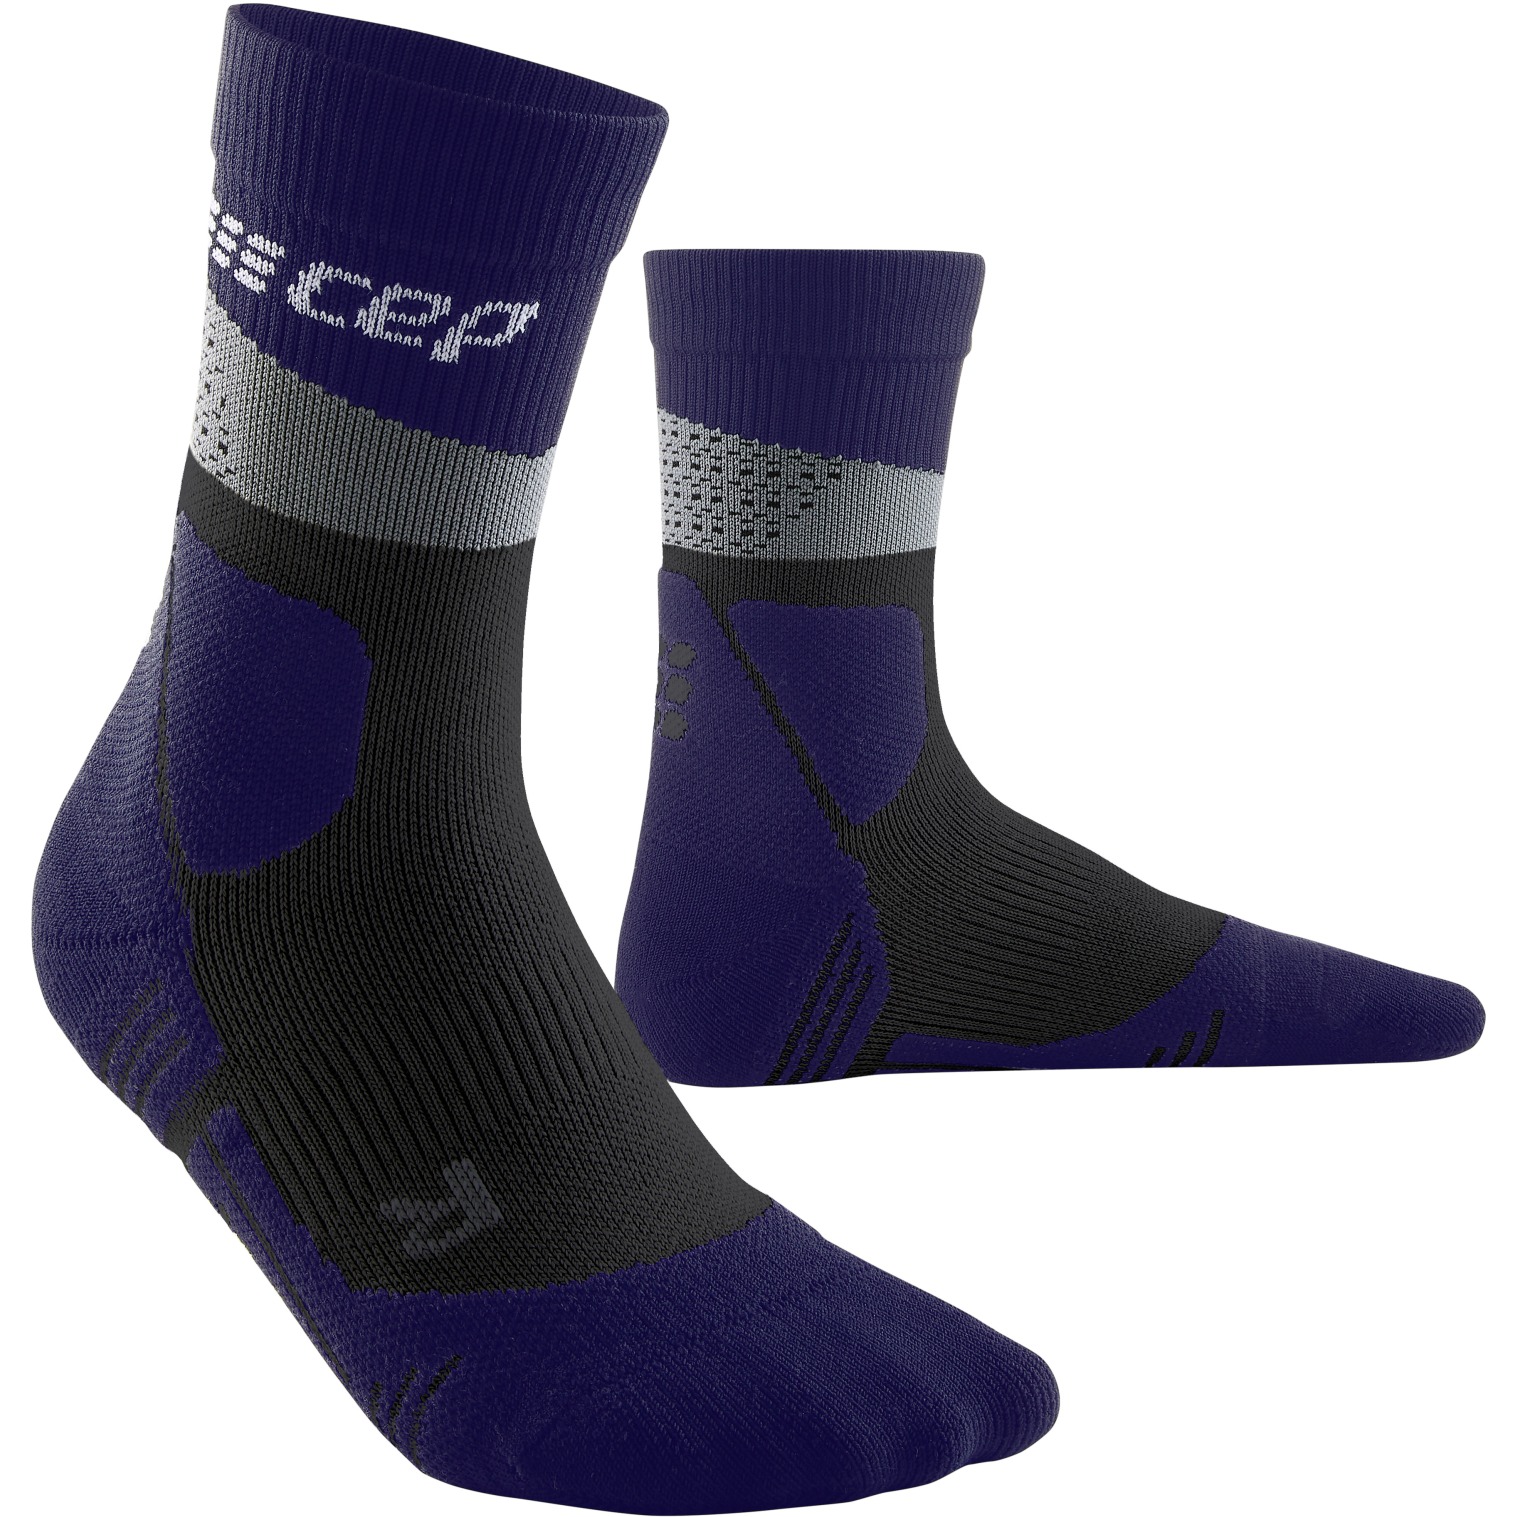 Picture of CEP Max Cushion Hiking Mid Cut Compression Socks Women - grey/purple